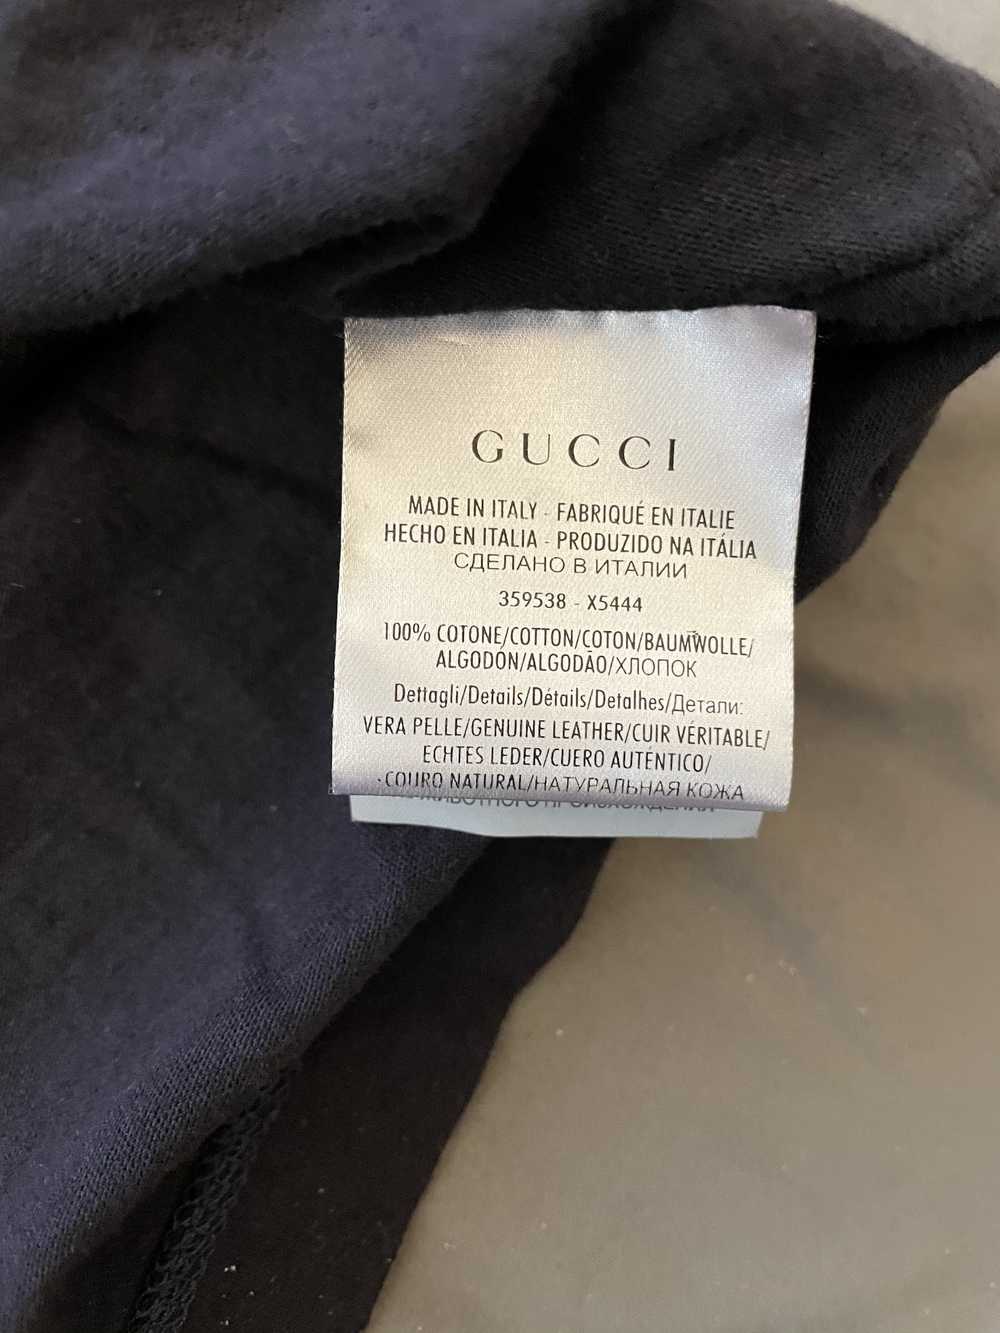 Gucci Gucci t shirt with leather pocket - image 5